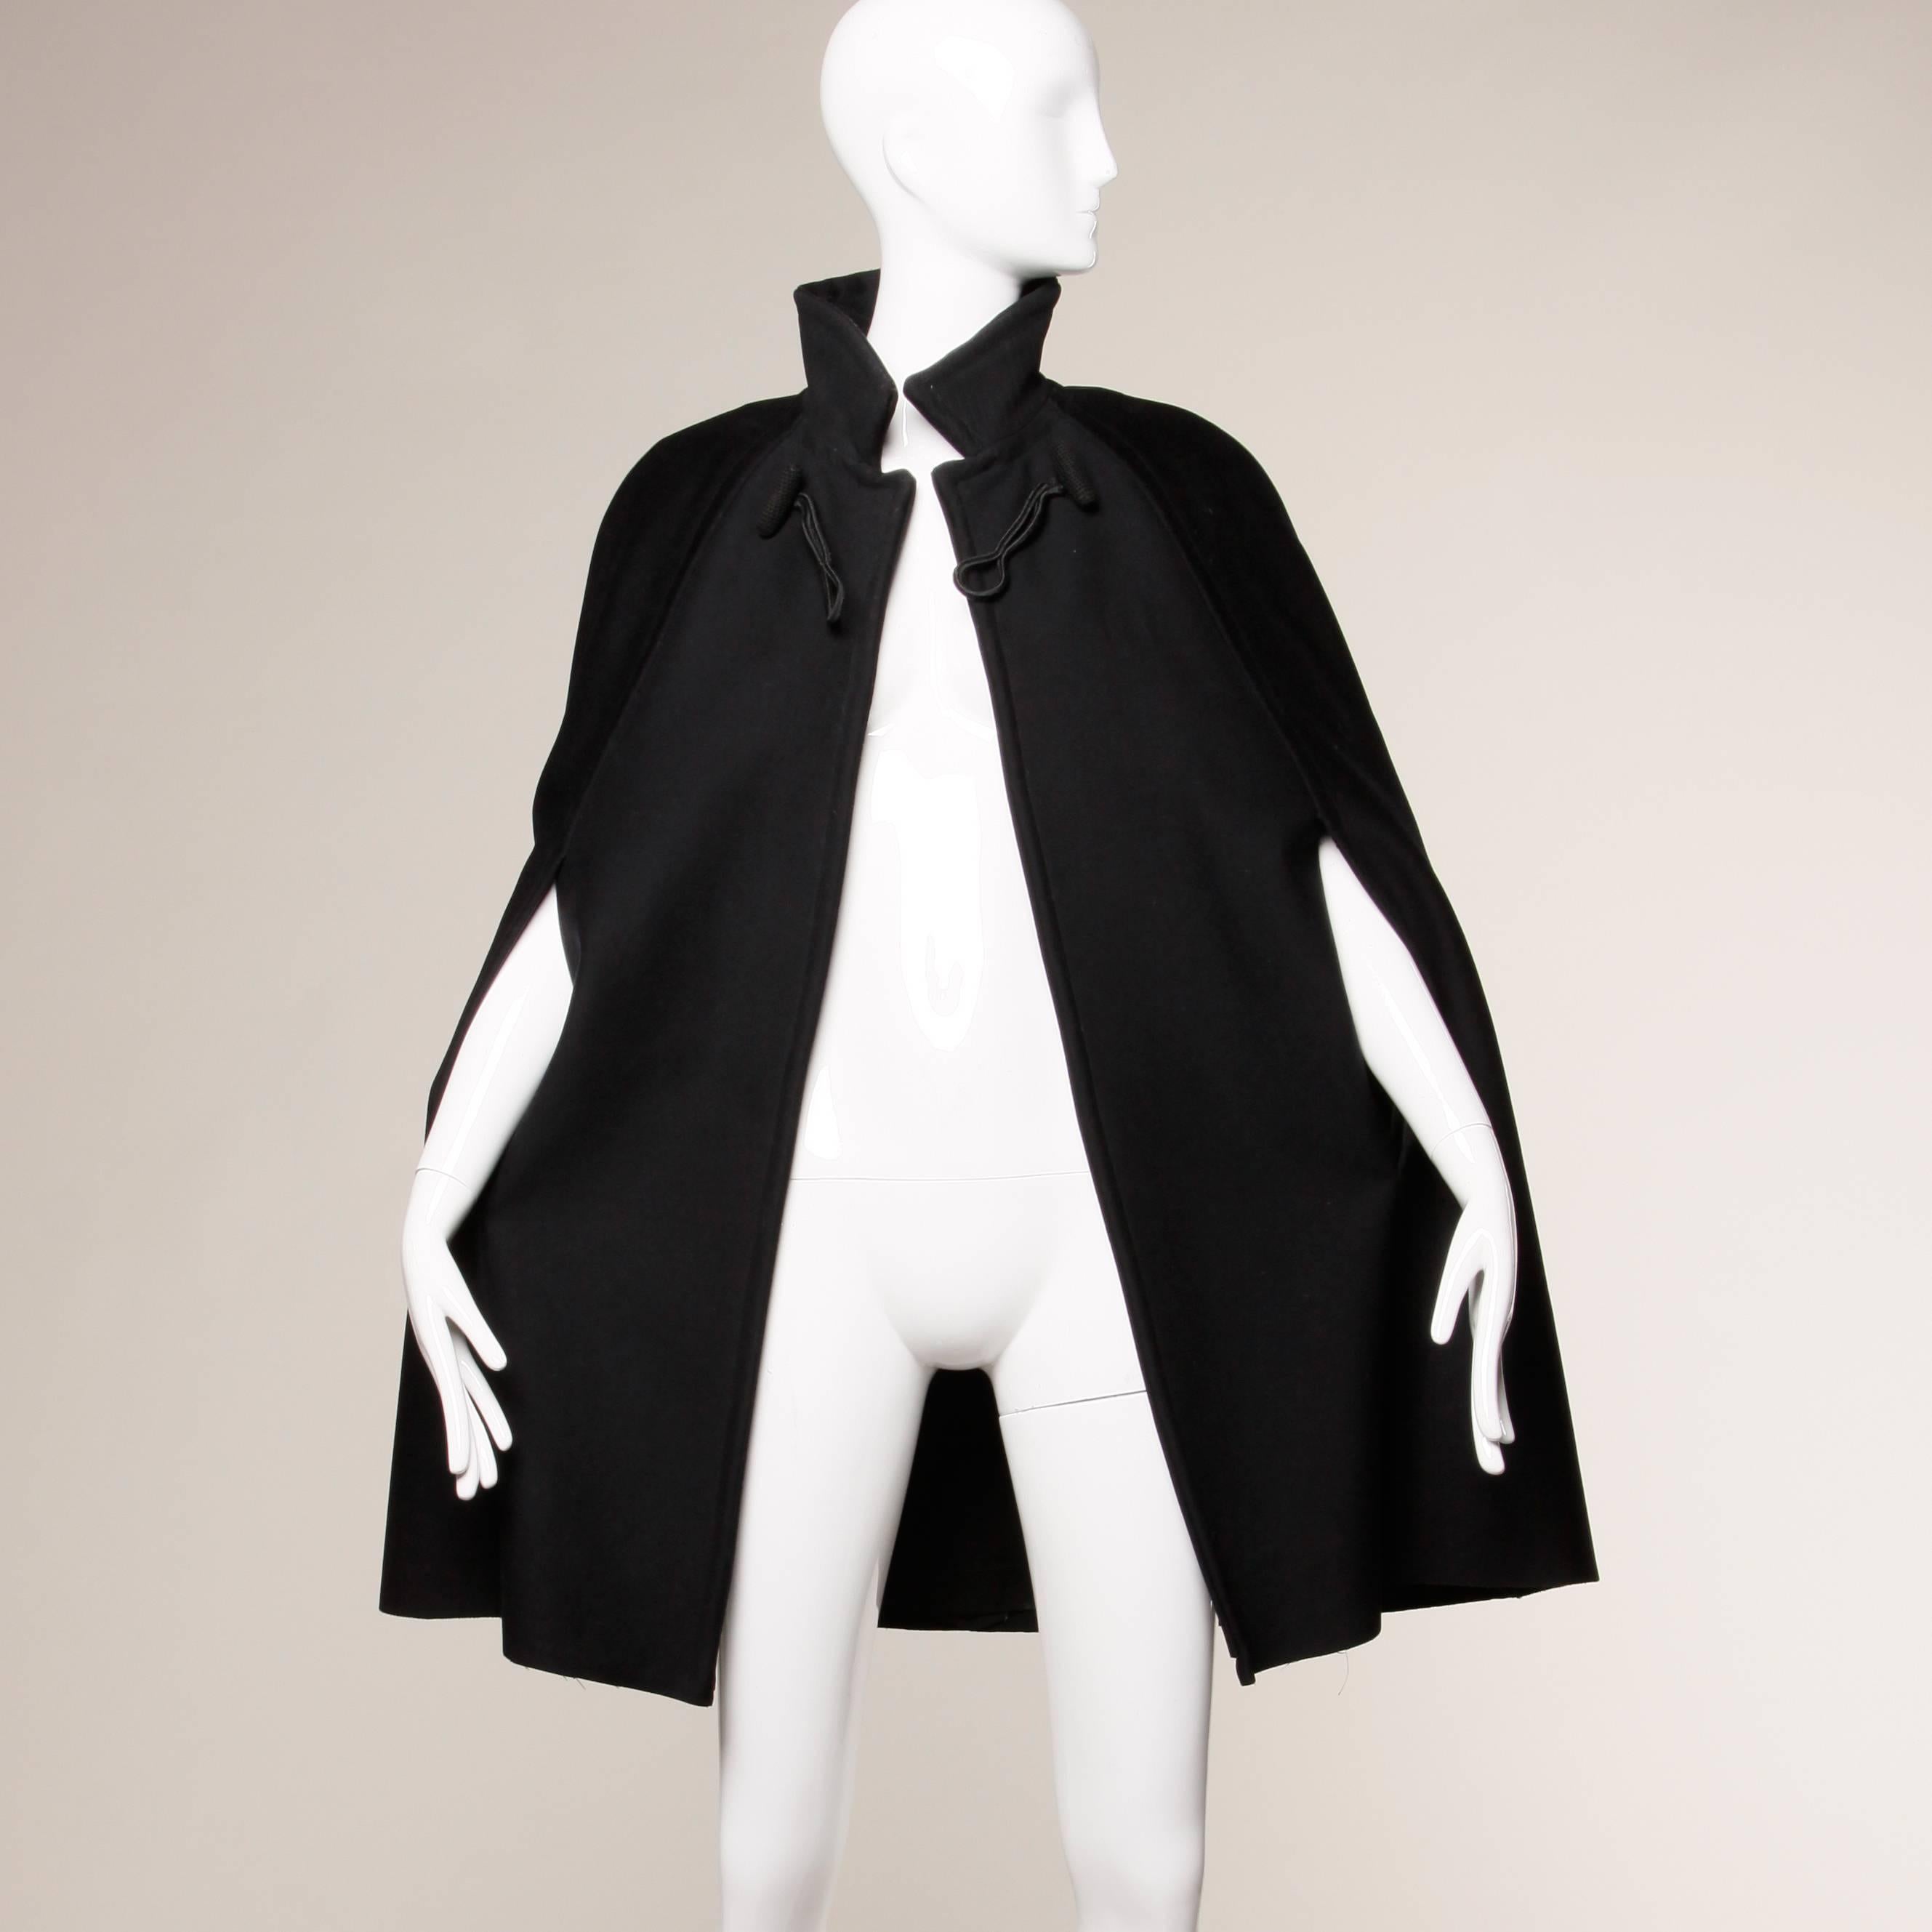 Gorgeous vintage black boiled wool cape coat with top stitching. Arm slits. Fully lined. Front closure. Total length measures 36